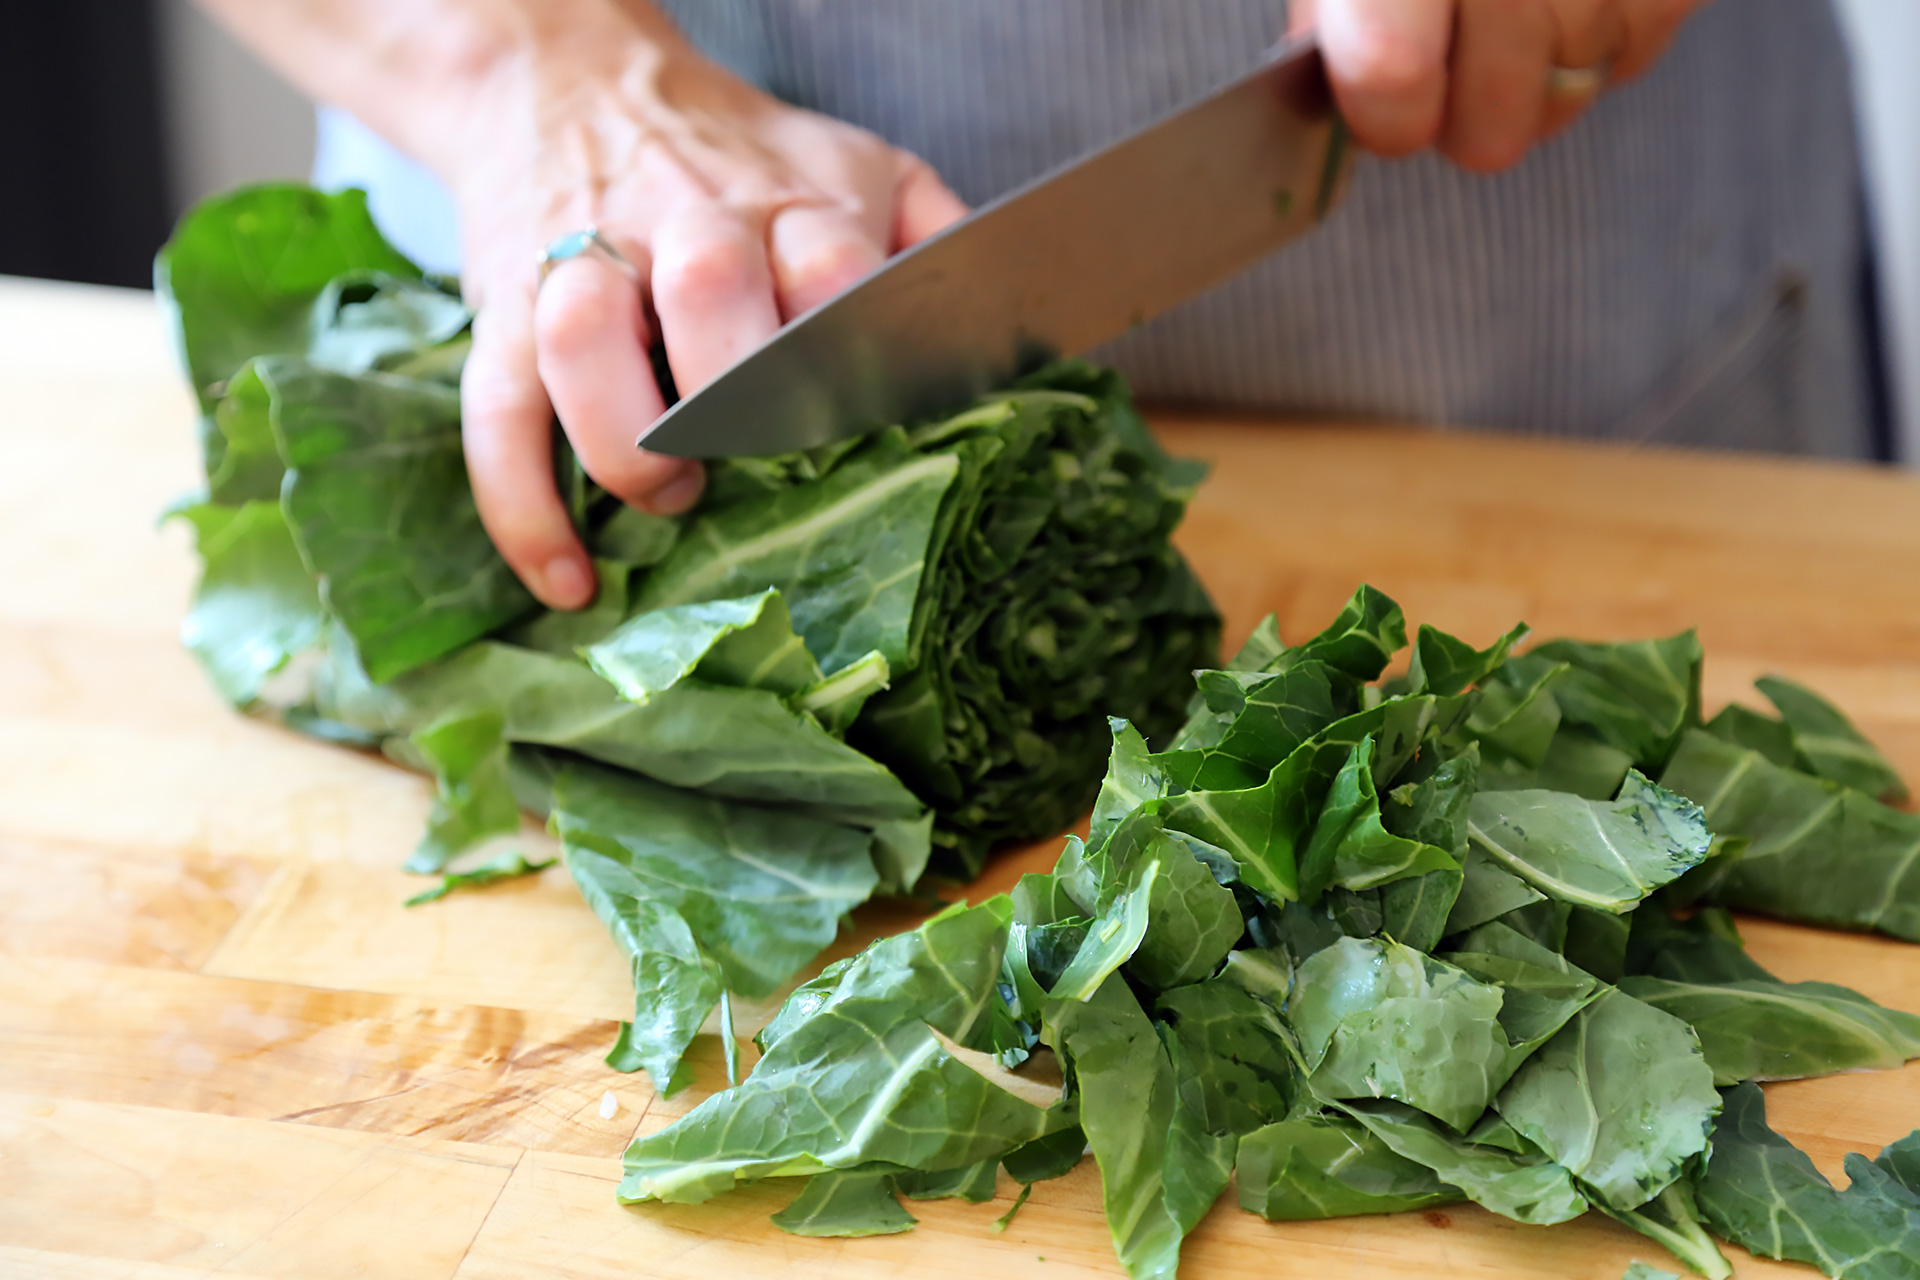 Slice the bunched greens.